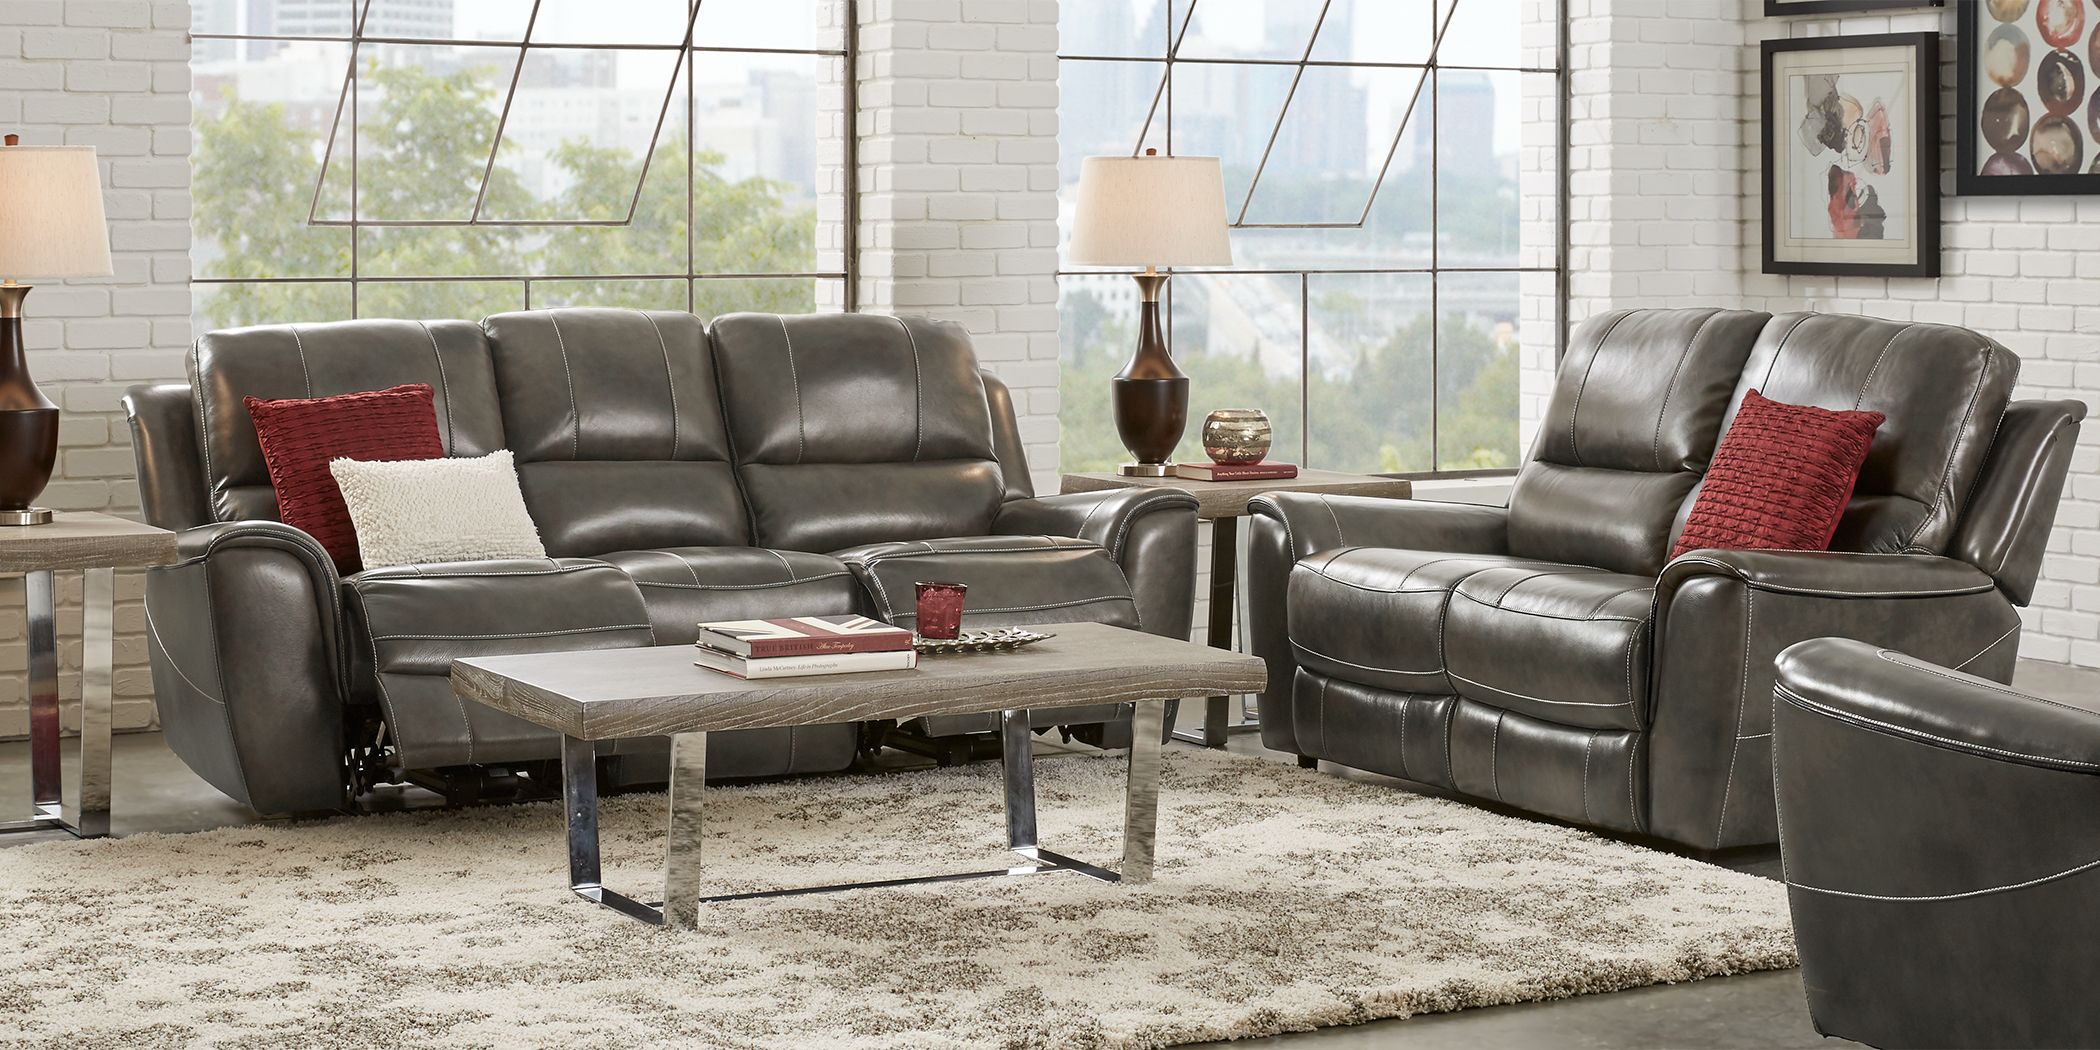 Lanzo Gray Leather 3 Pc Living Room with Reclining Sofa - Rooms To Go